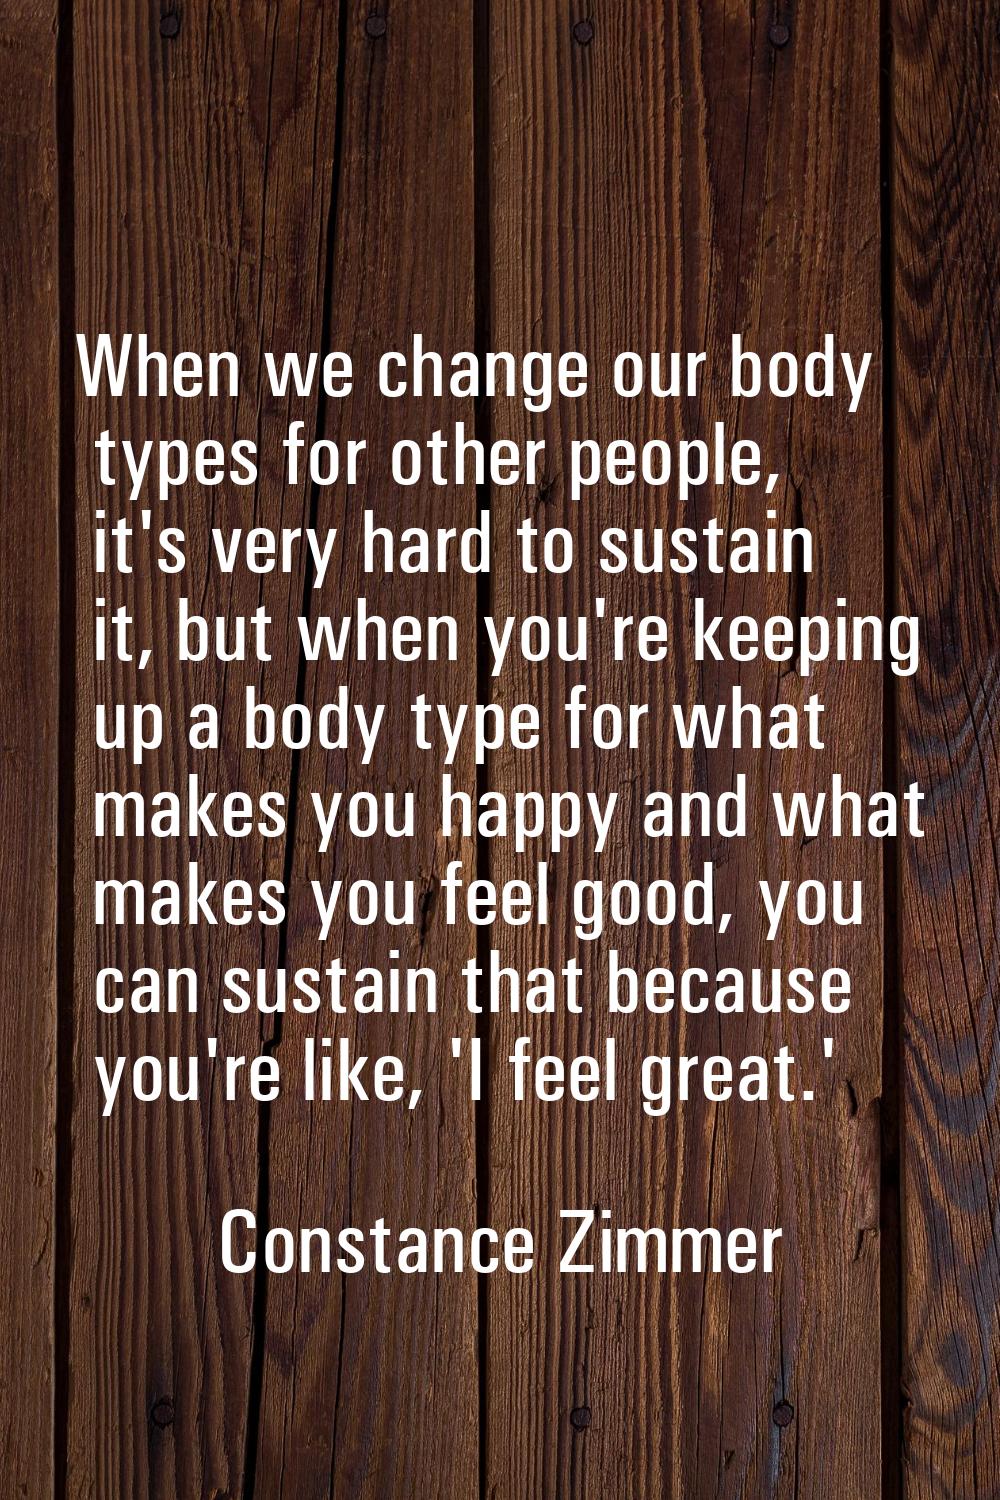 When we change our body types for other people, it's very hard to sustain it, but when you're keepi